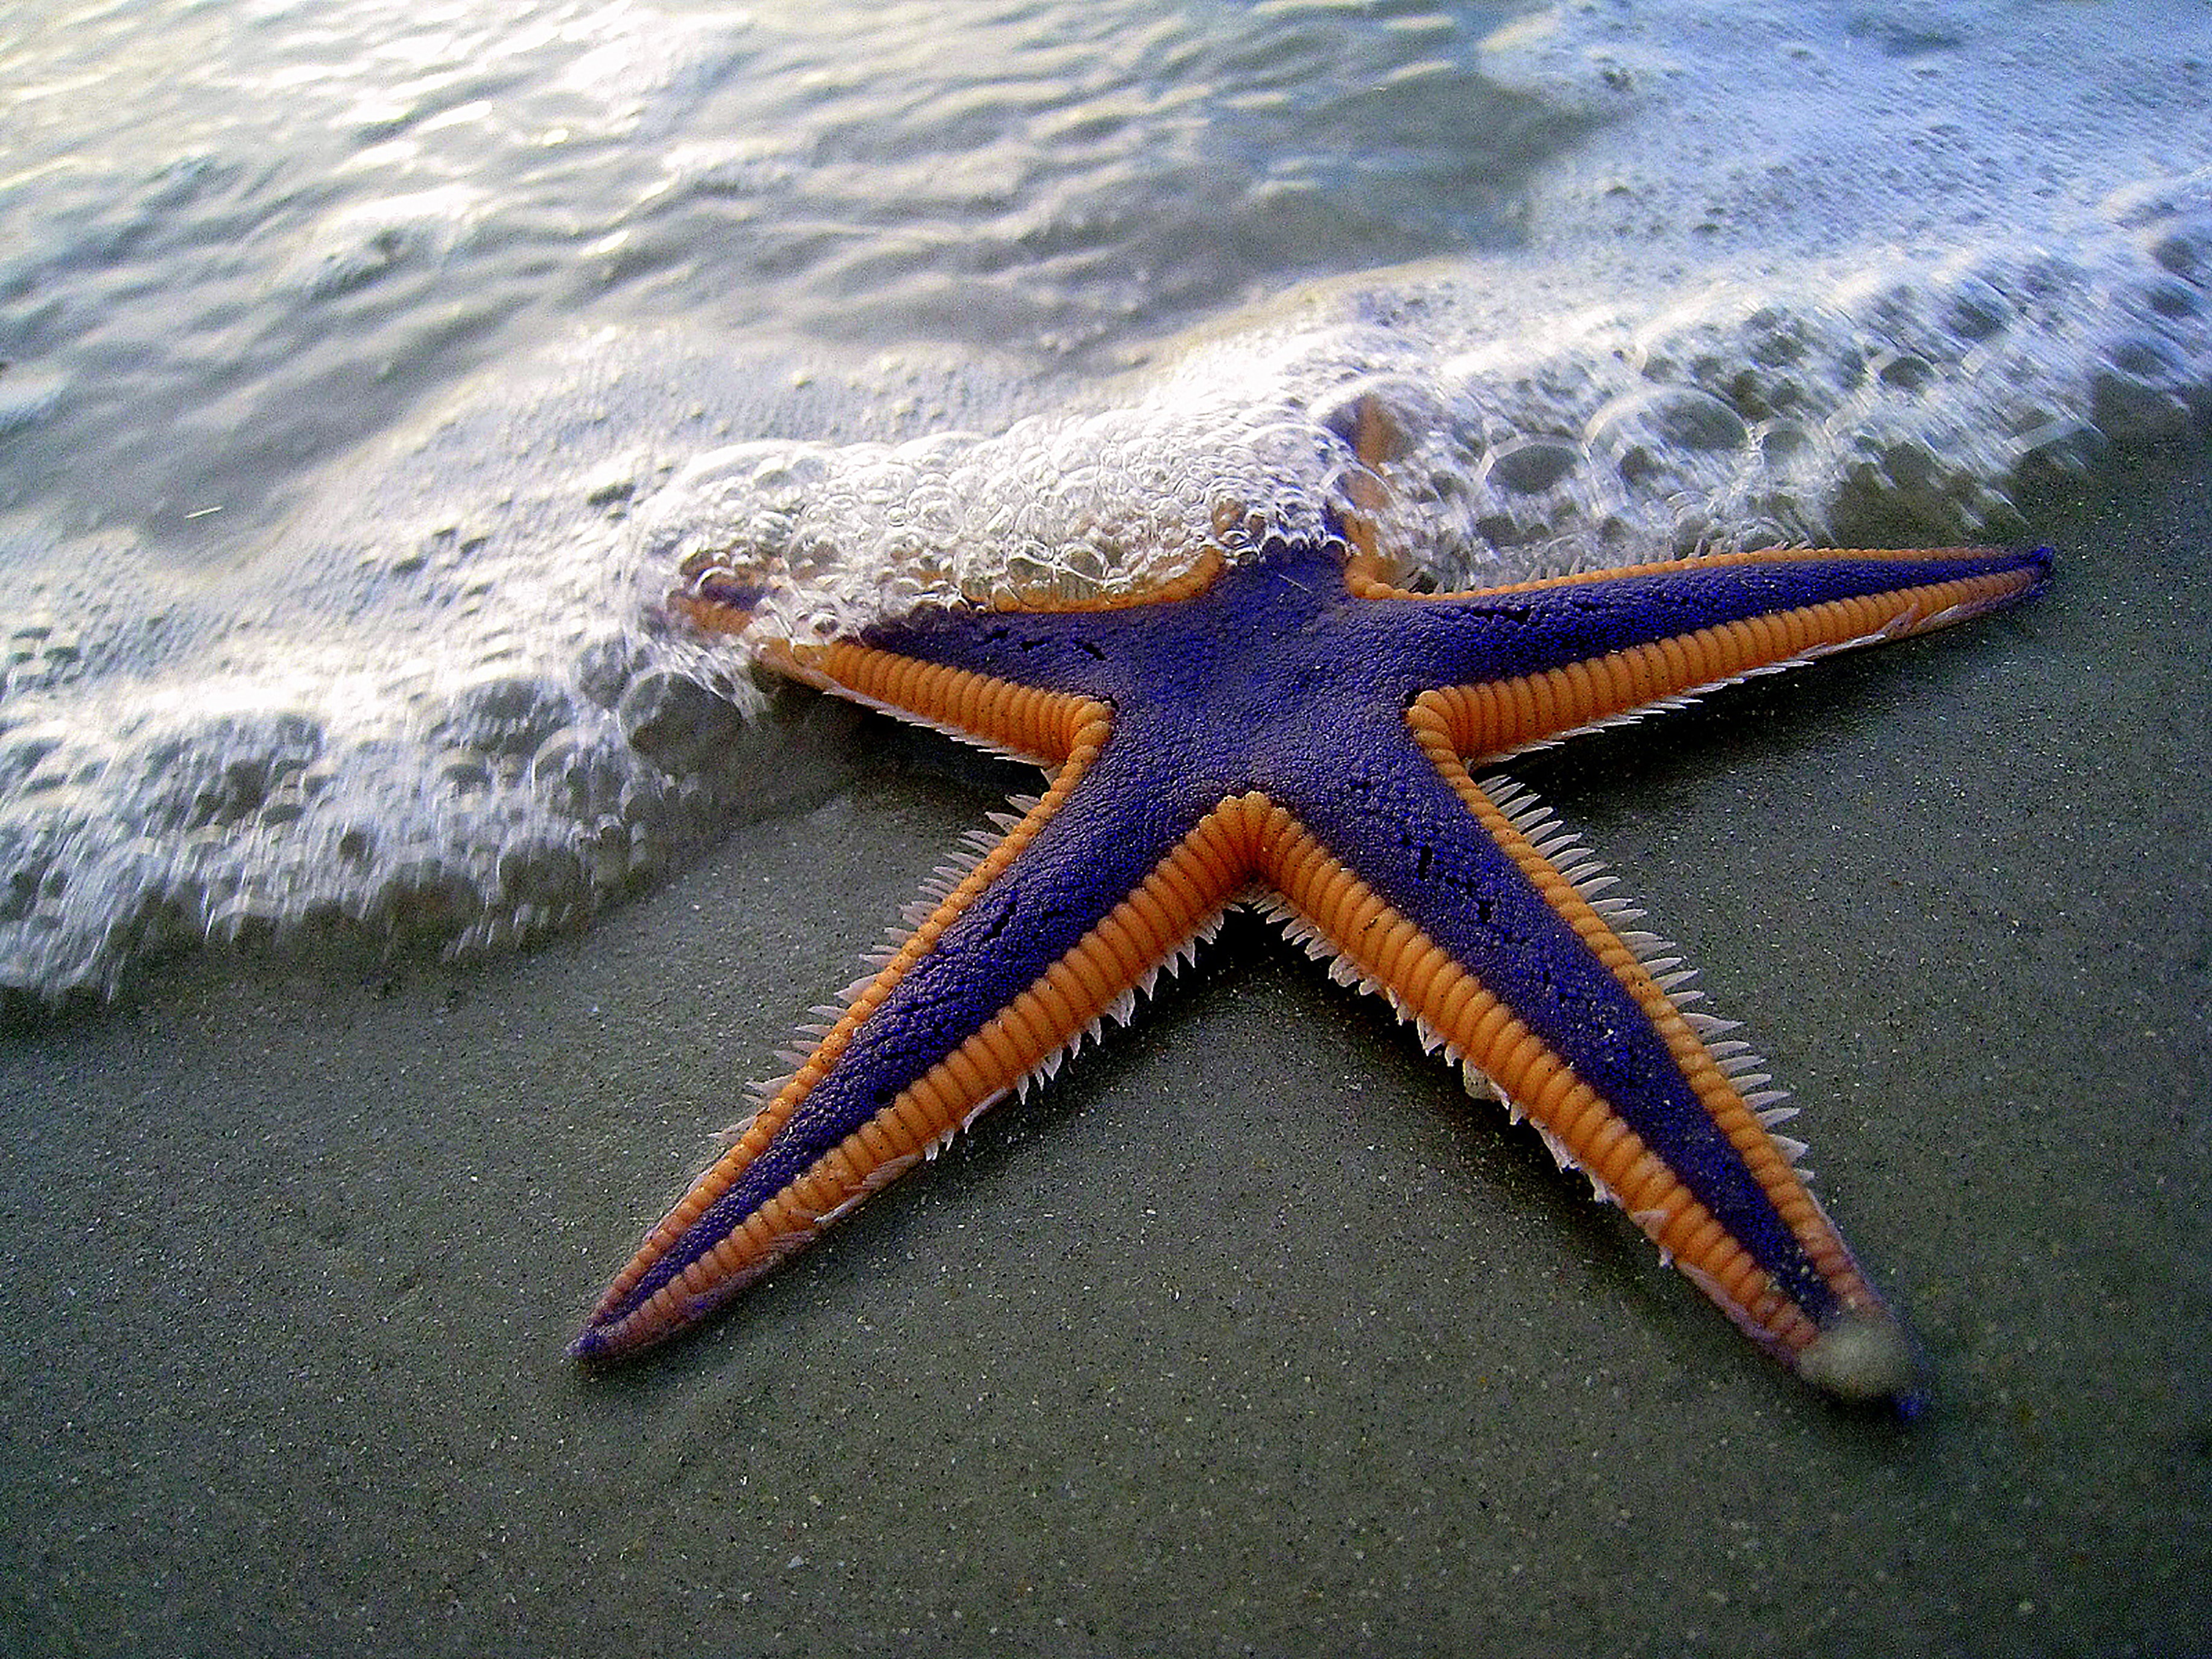 Purple and orange starfish on a sandy beach, partially covered by seawater